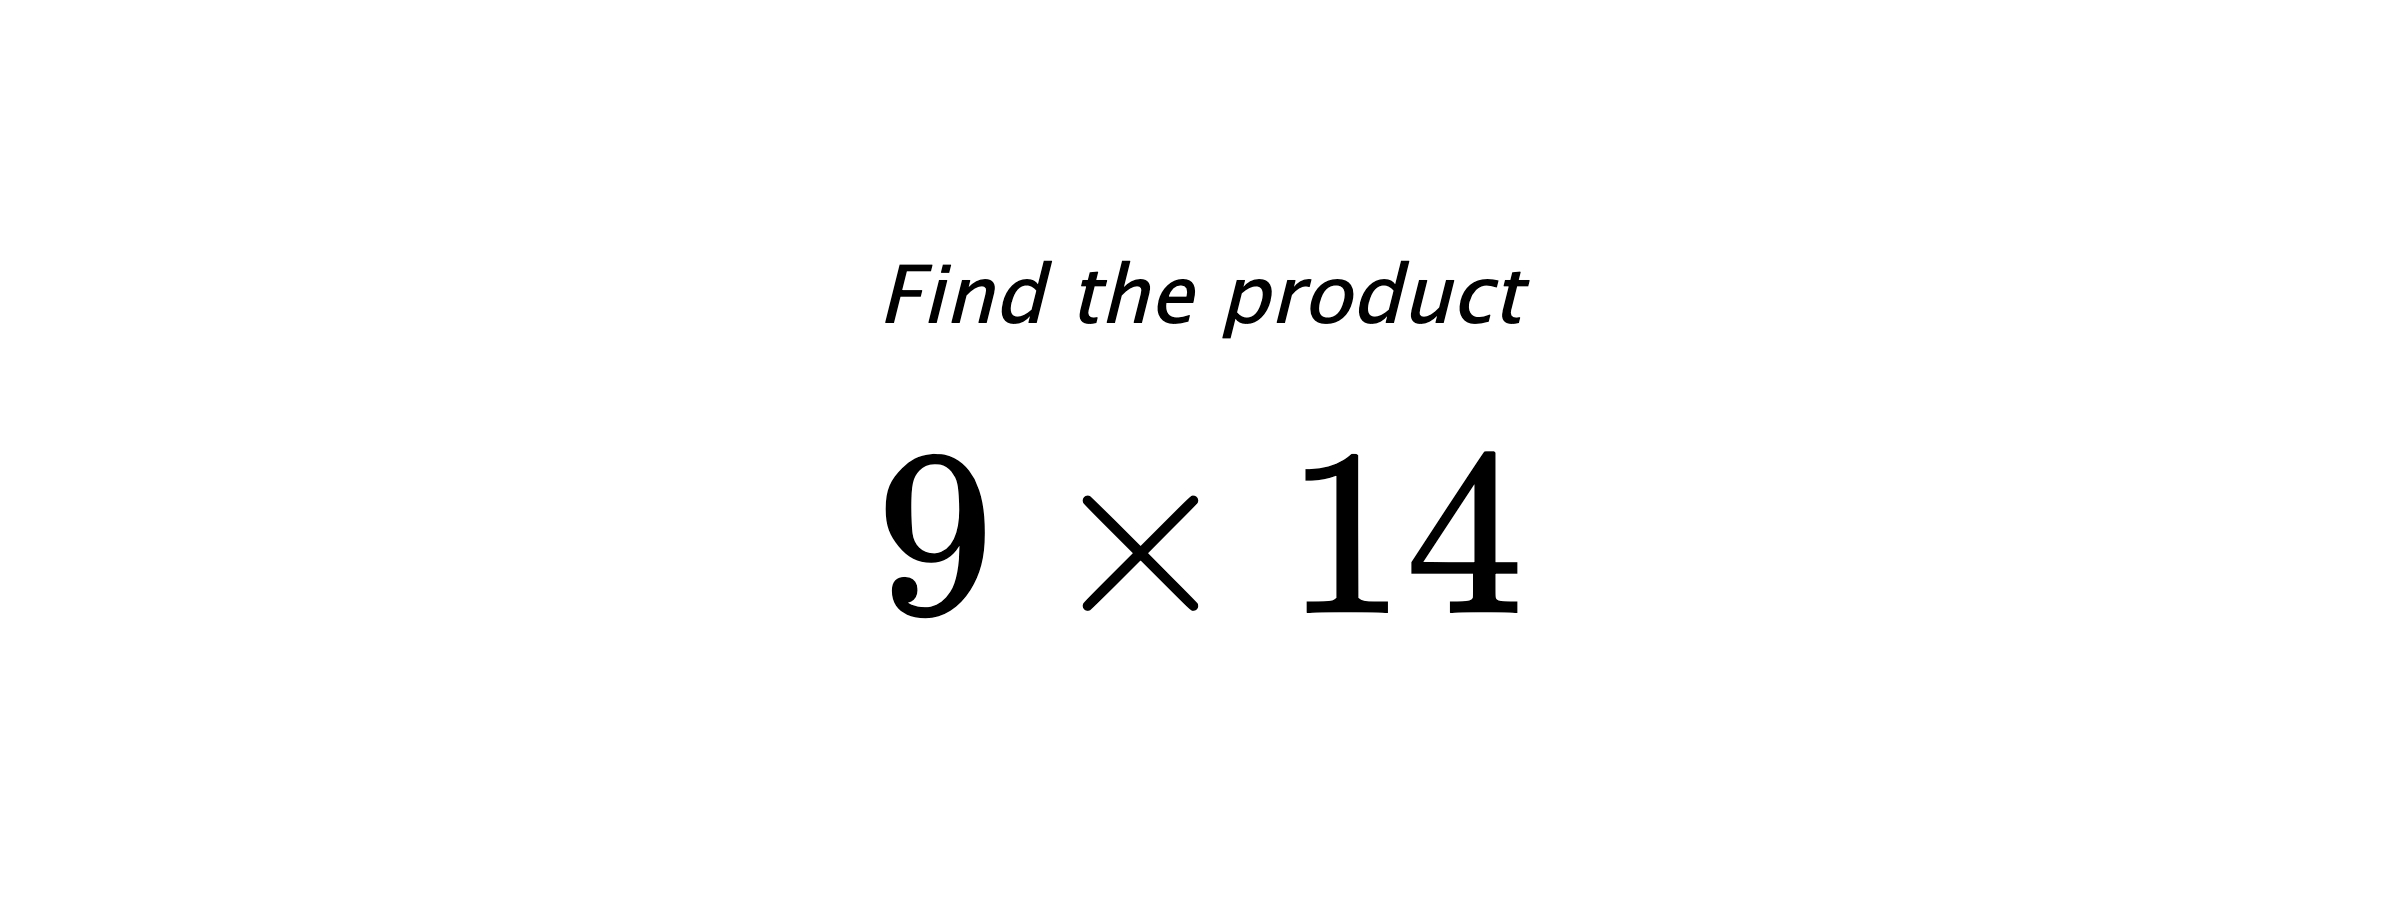 Find the product $ 9 \times 14 $